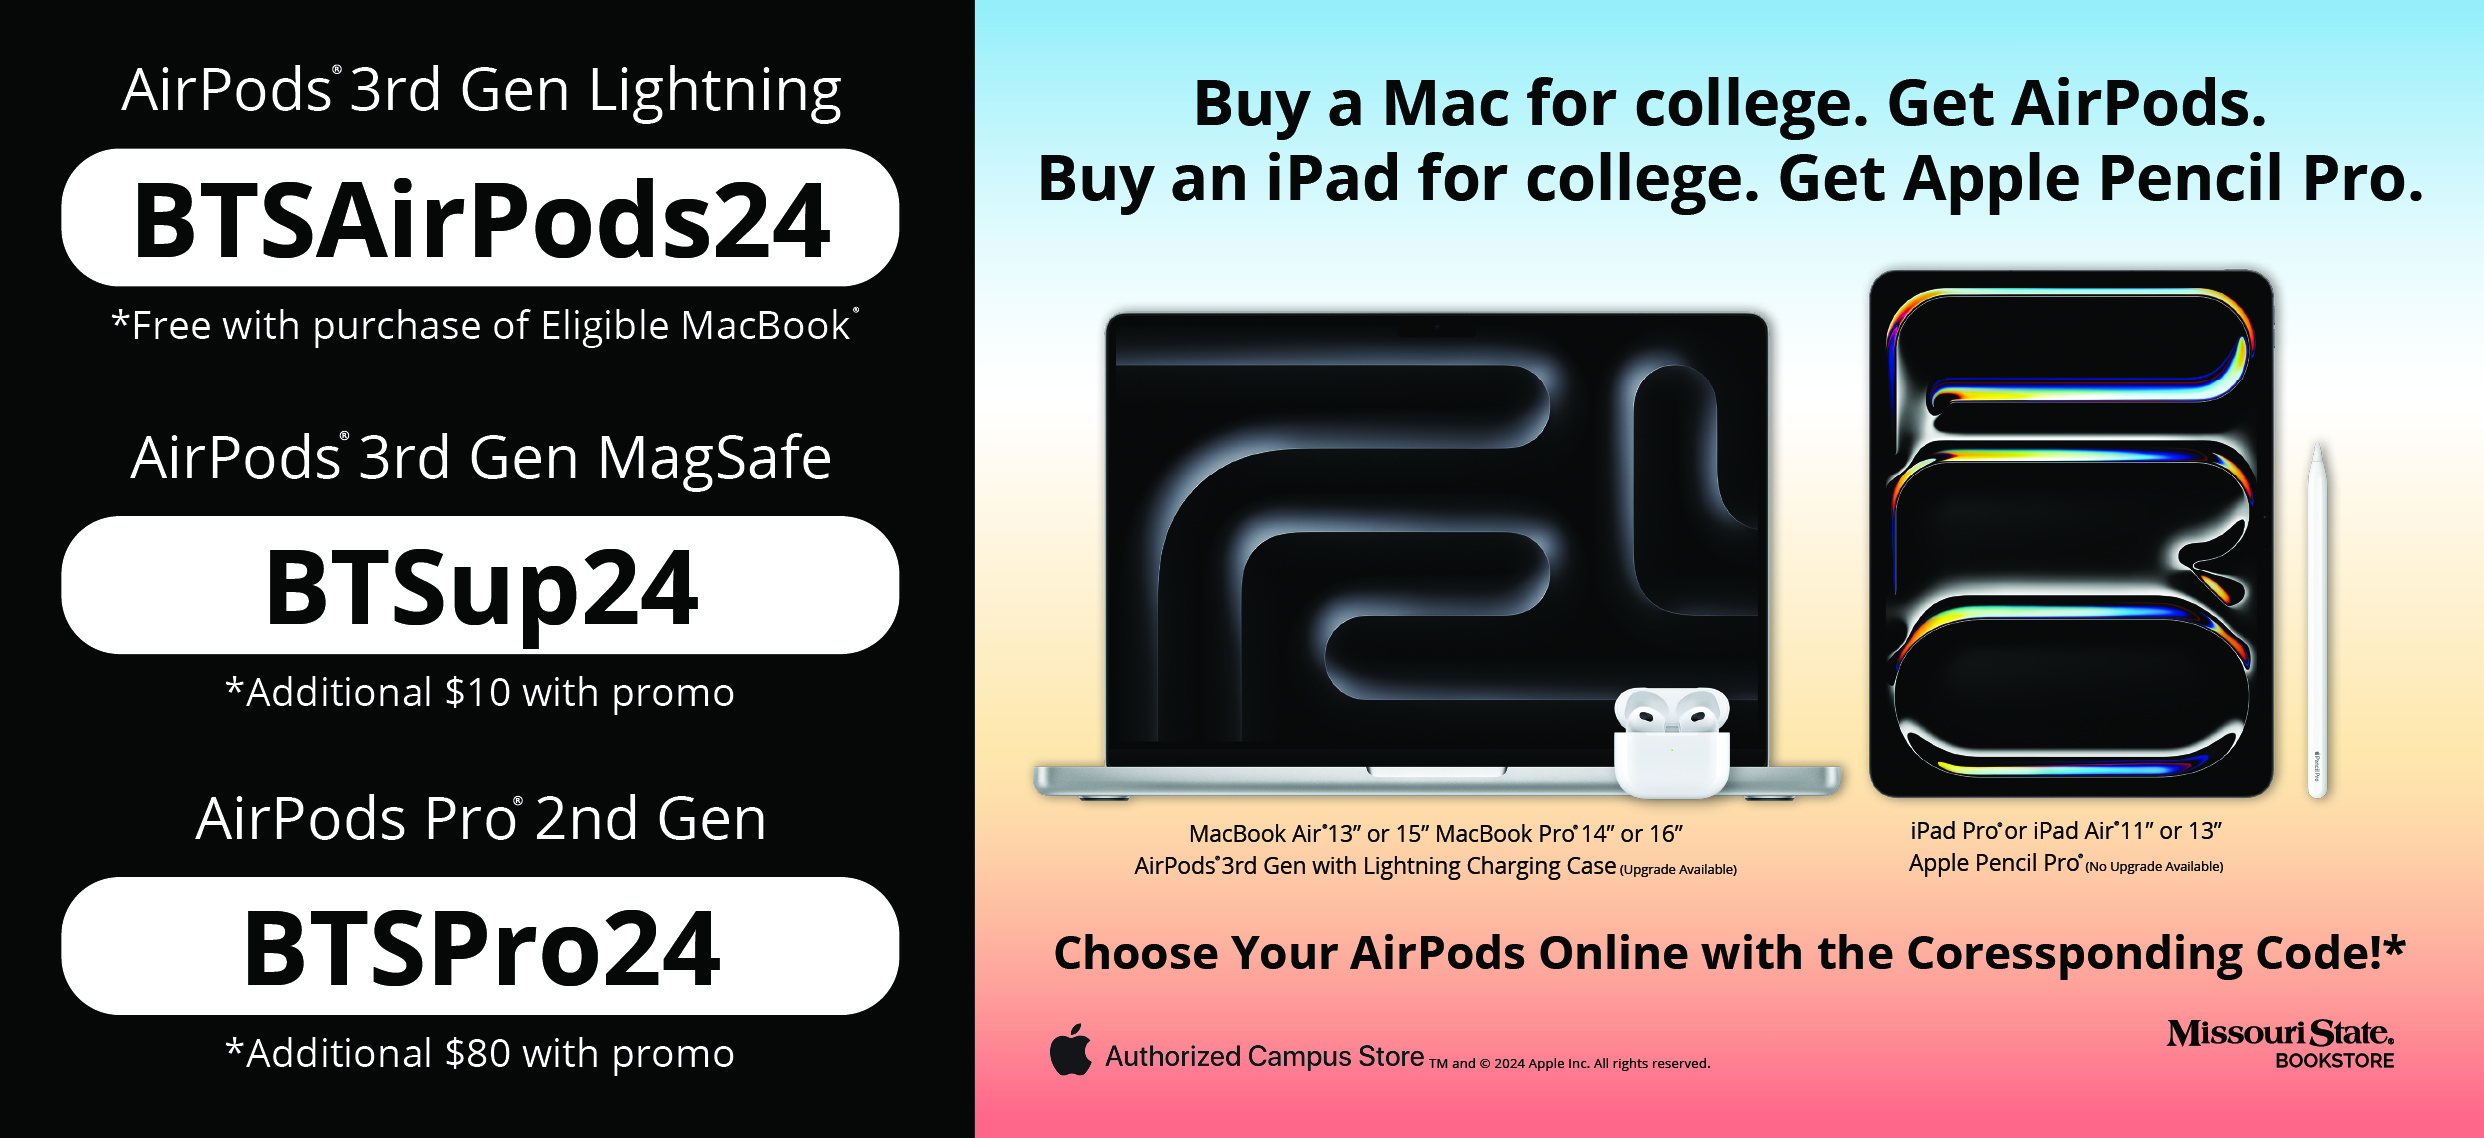 Buy a Mac for college. Get AirPods. Buy an iPad for college. Get an Apple Pencil Pro.*